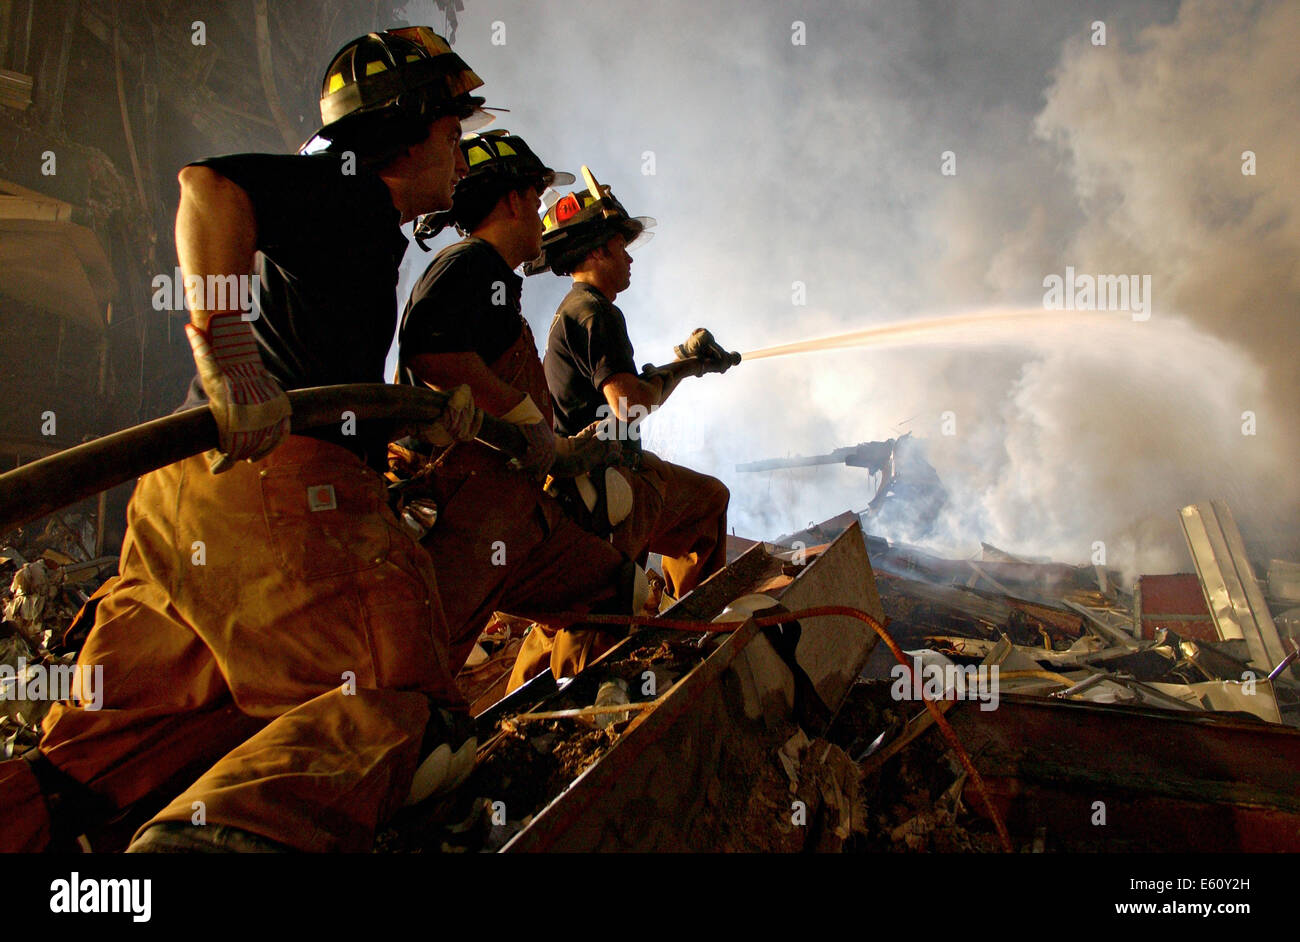 Firemen continue to fight blazes amongst the wreckage of the World Trade Center in the aftermath of a massive terrorist attack which destroyed the twin towers killing 2,606 people September 20, 2001 in New York, NY. Stock Photo